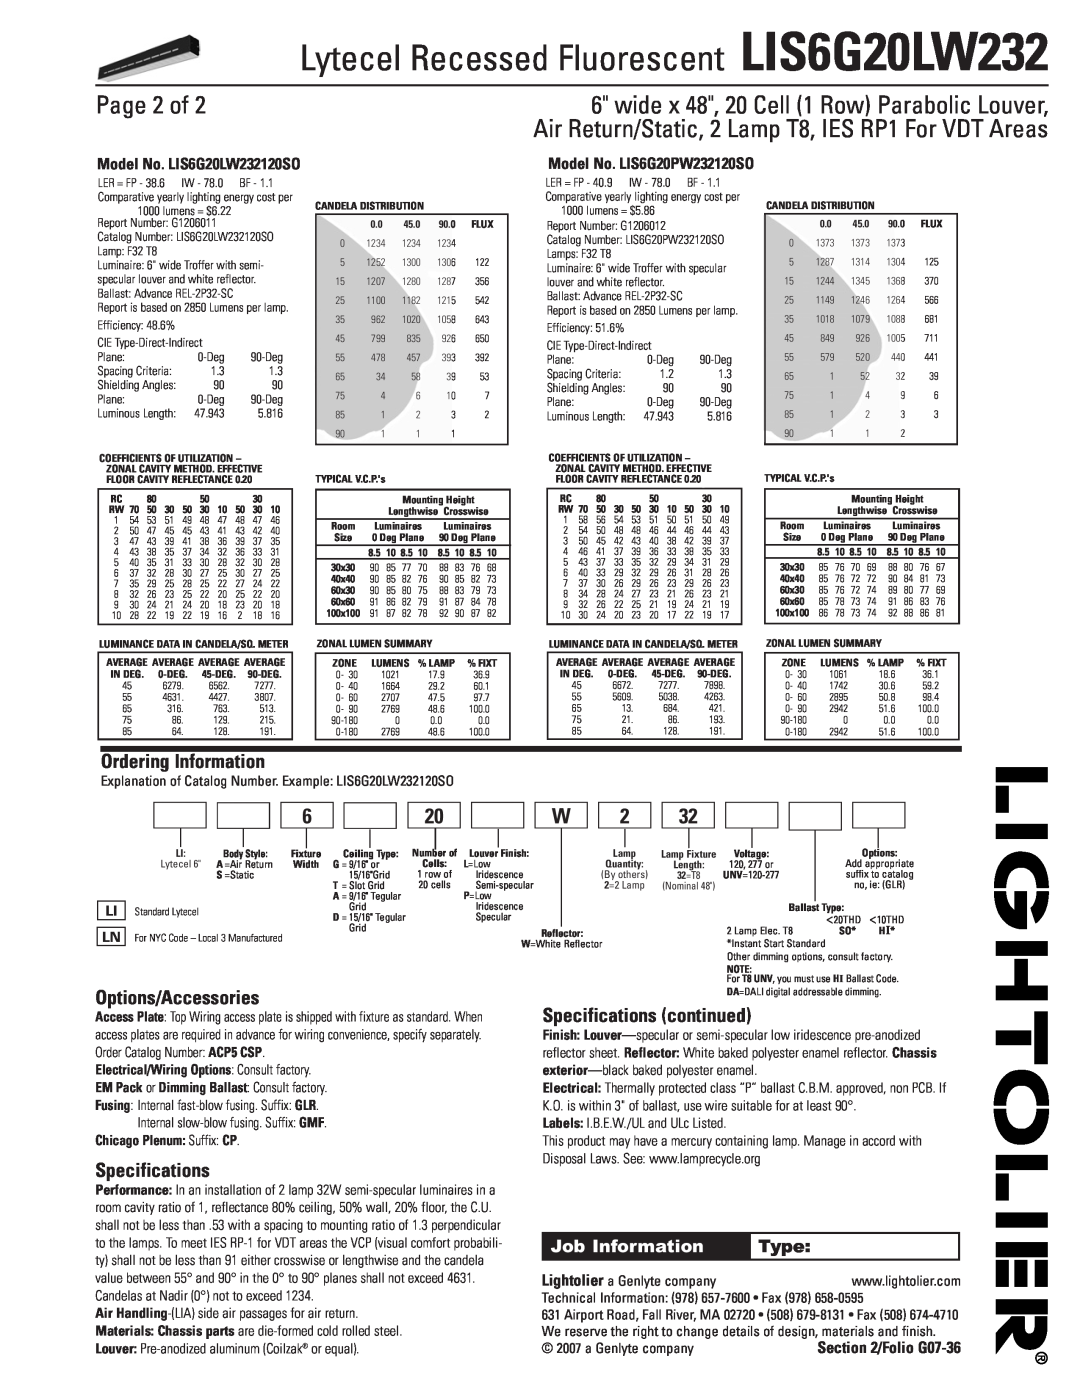 Lightolier LIS6G20LW232 dimensions Page 2 of, Ordering Information, Options/Accessories, Specifications continued, Type 